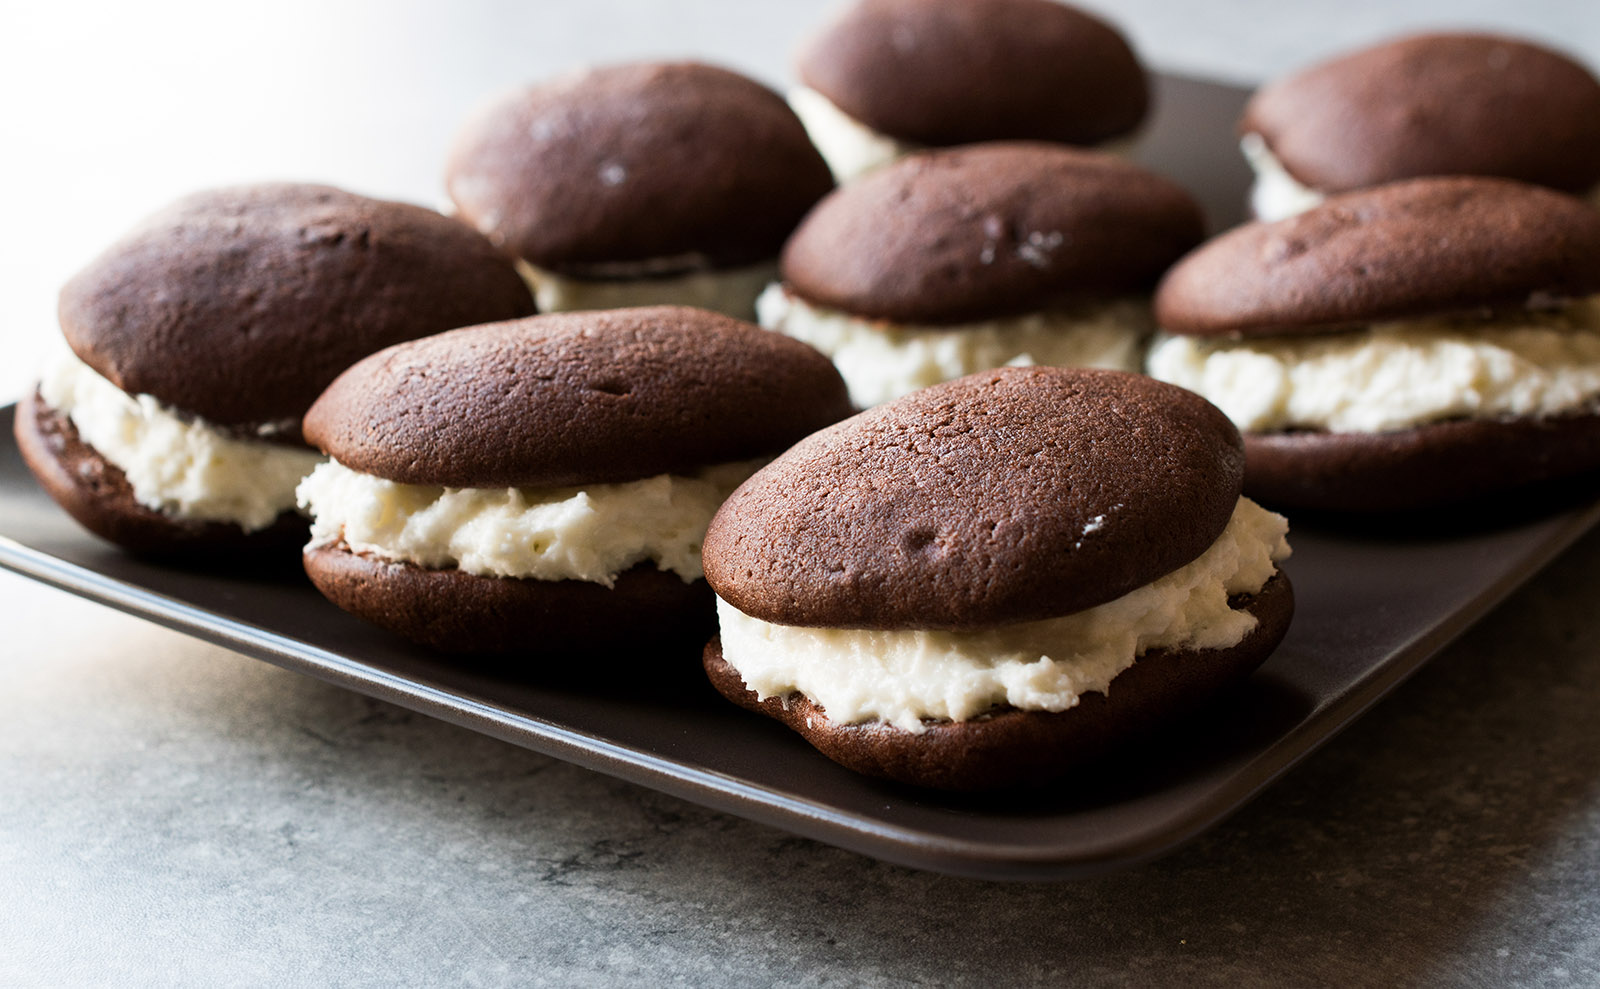 cream-filled whoopie pies on a wooden table